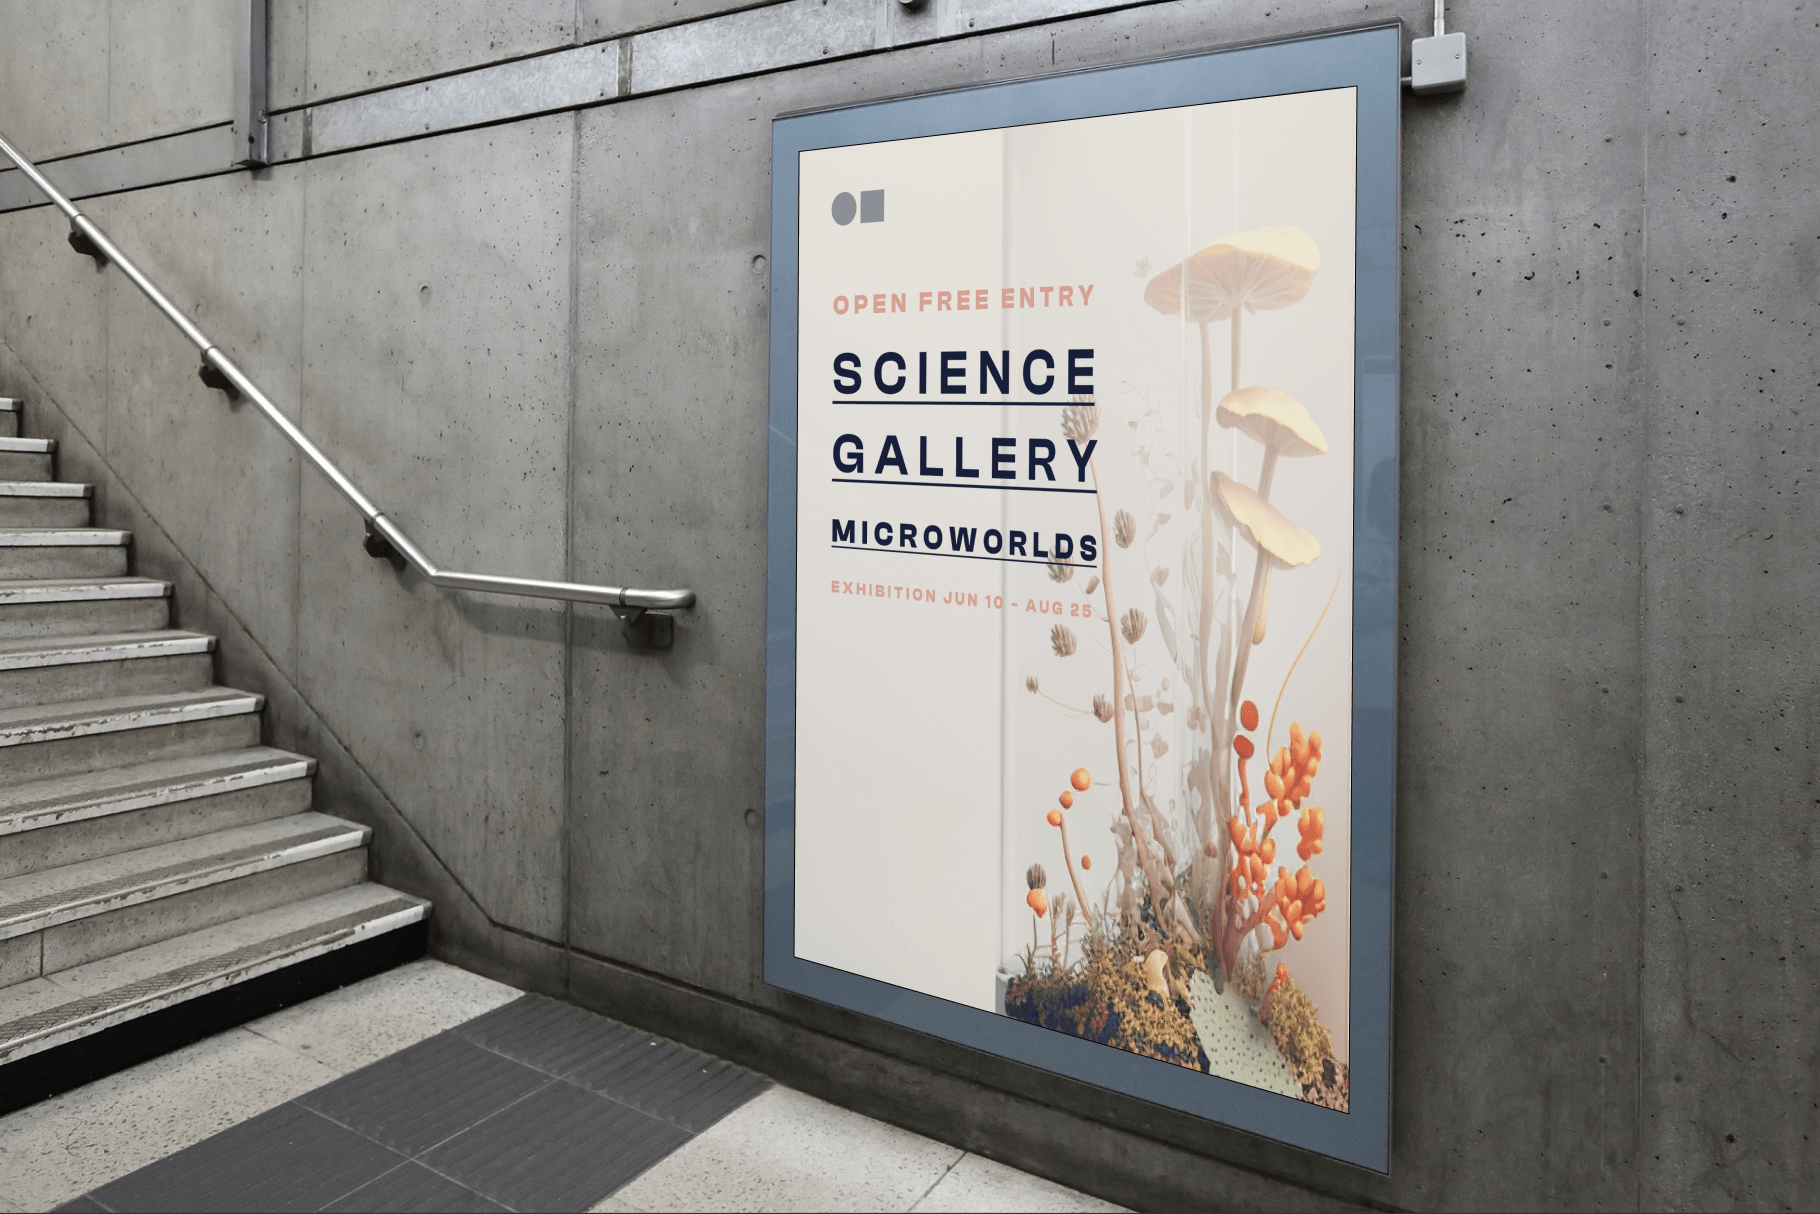 Outdoor billboard of a science gallery themed display of a terrarium